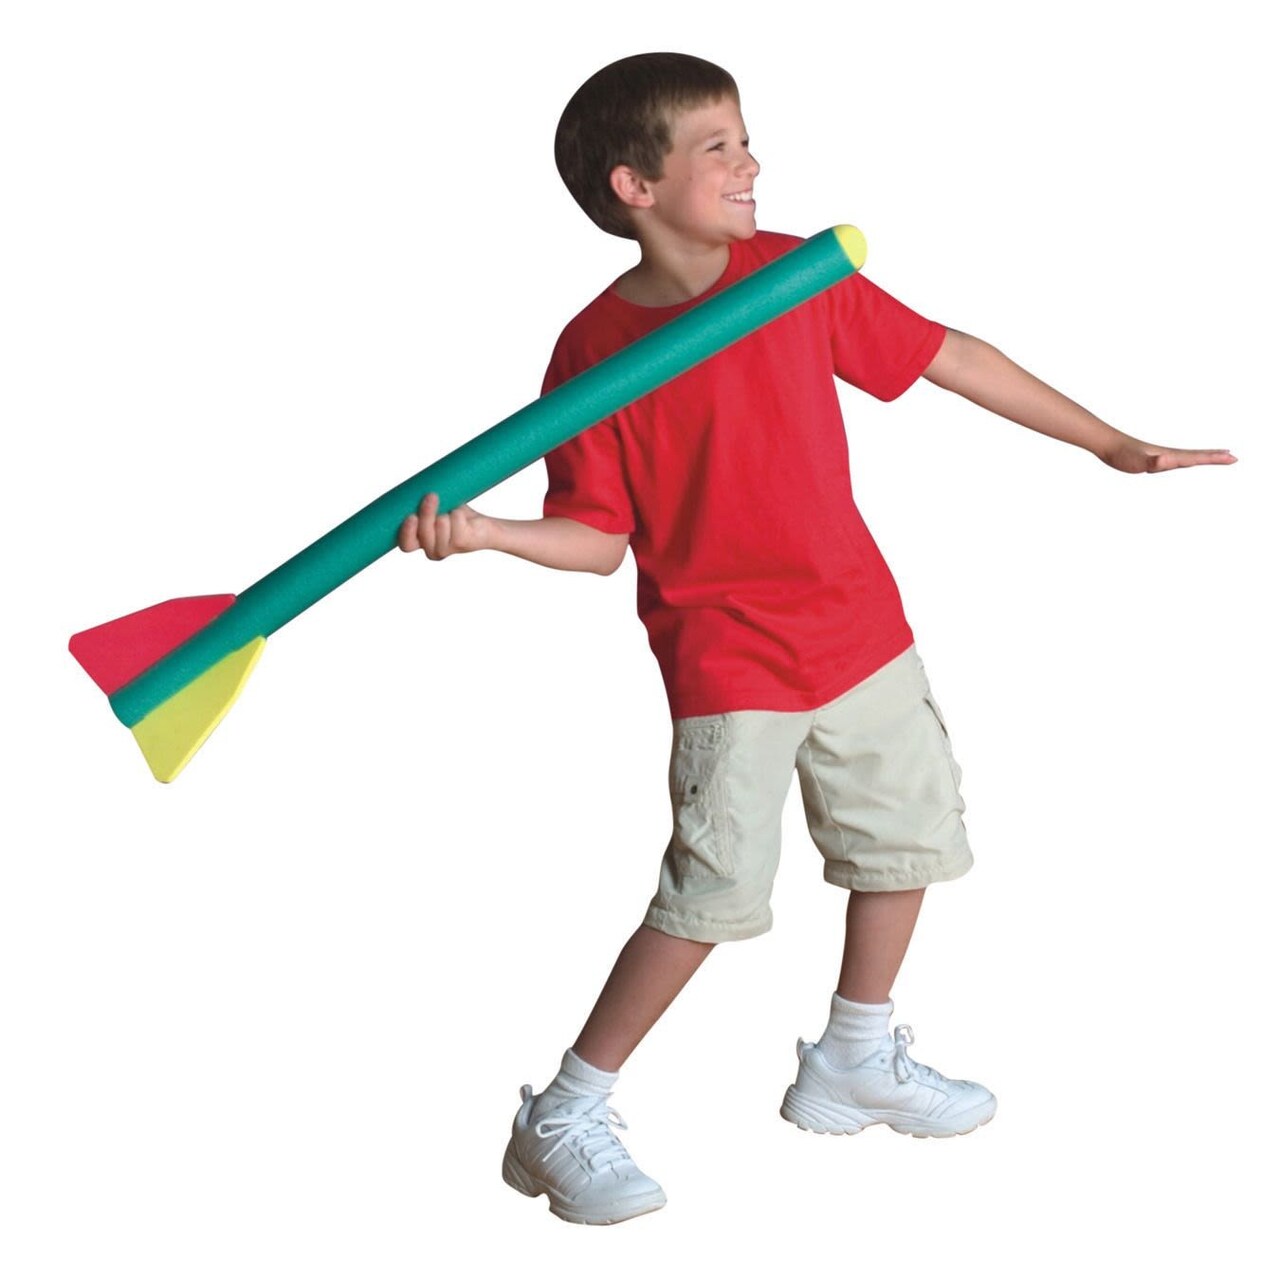 S&#x26;S Worldwide Foam Rocket Javelin. All Foam Javelin, Safe for Kids to Use Indoors or Outdoors. 32.5&#x22; Long.  Weighs Less Than 3 Ounces!  Travels Up to 75 Feet. Assorted Colors.